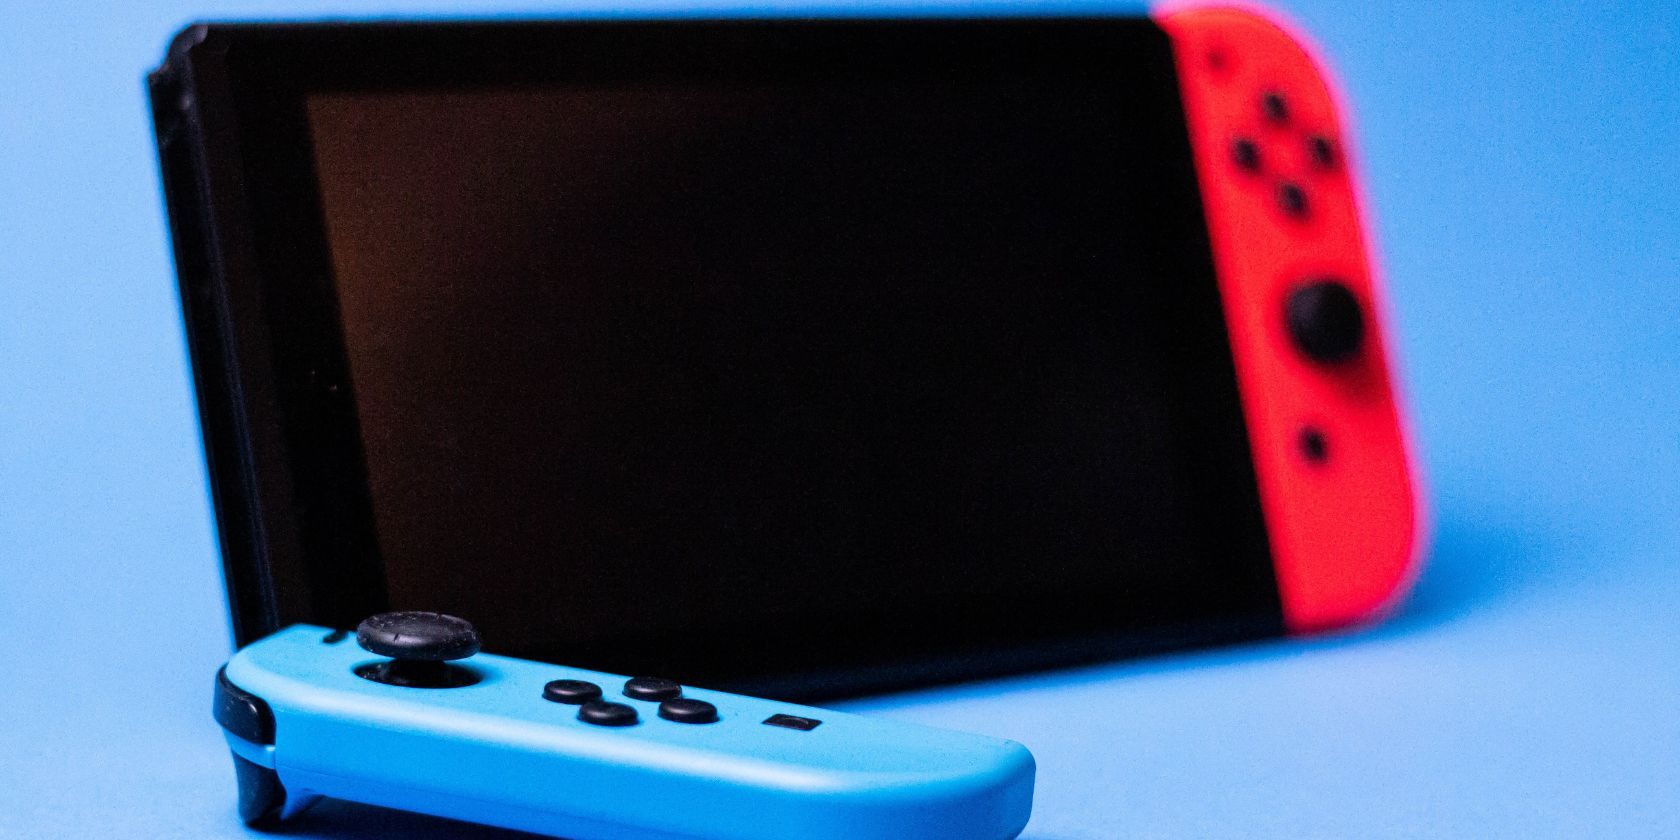 https://static1.makeuseofimages.com/wordpress/wp-content/uploads/2022/10/Close-up-of-nintendo-switch-with-blue-and-red-joy-cons.jpg